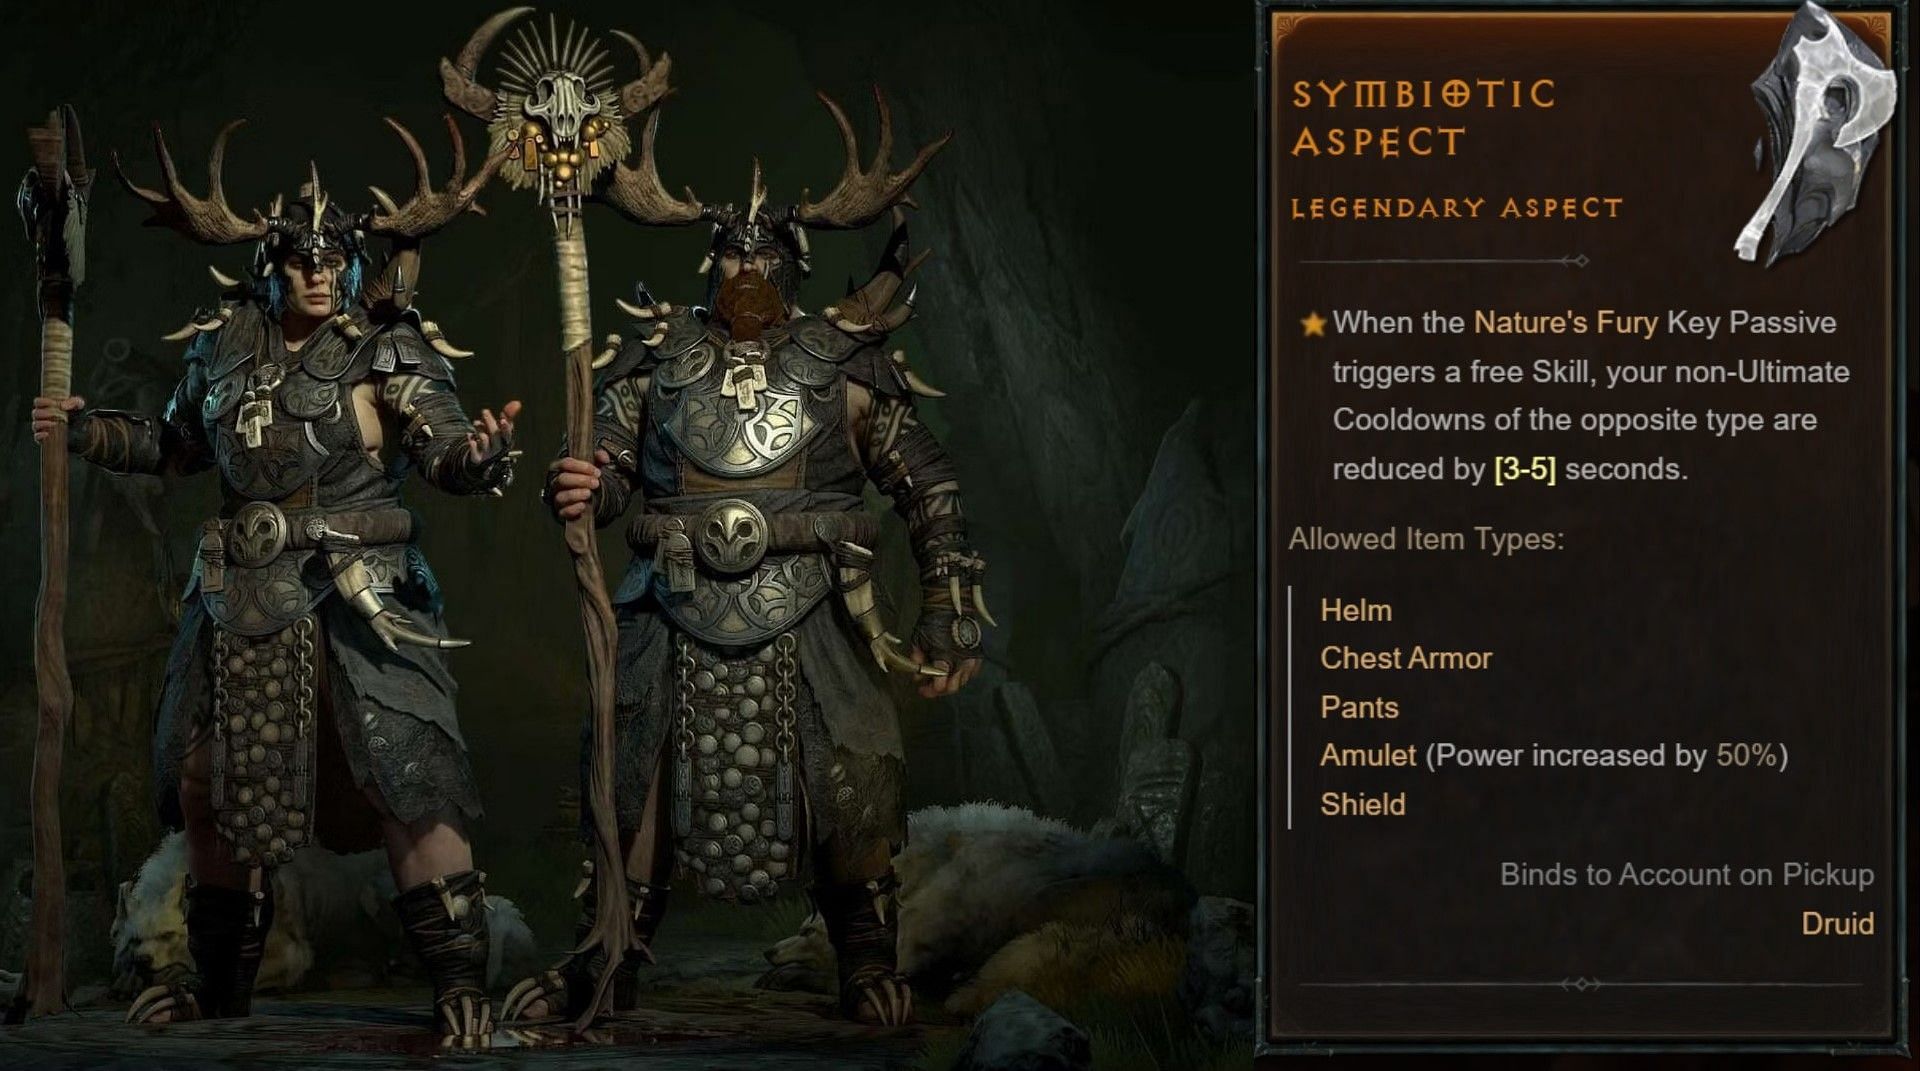 Diablo 4 male and female Druids on the left and Symbiotic Aspect description on the right.